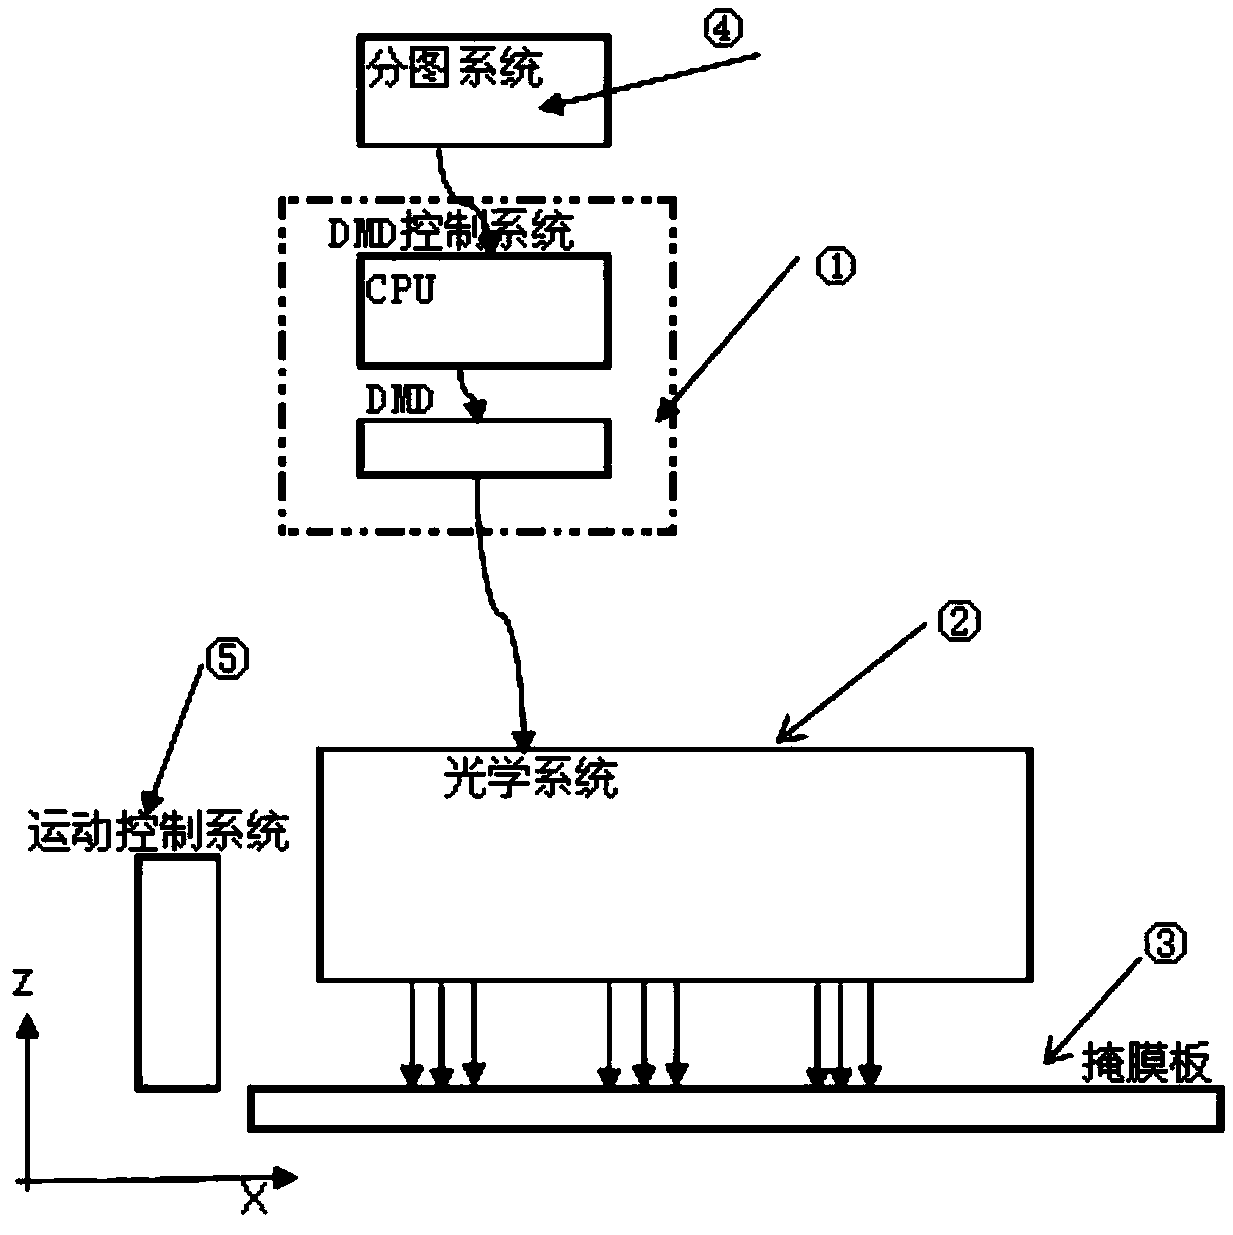 A DMD multi-region laser projection system and exposure method